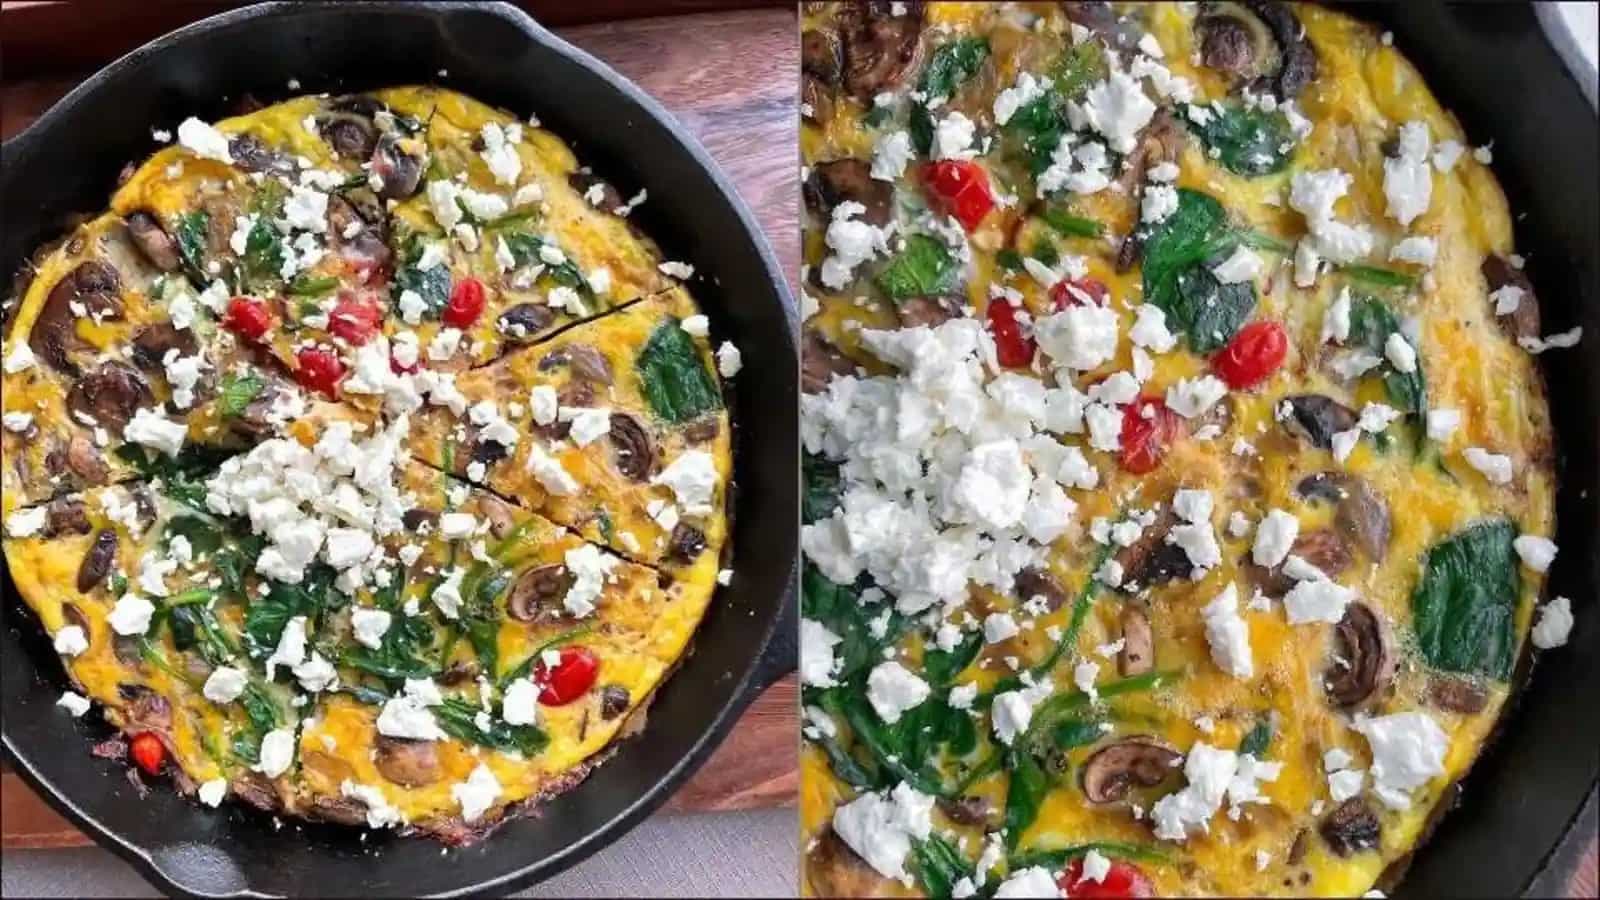 Recipe: Bookmark this Feta and Spinach Frittata for prettiest Easter brunch ever